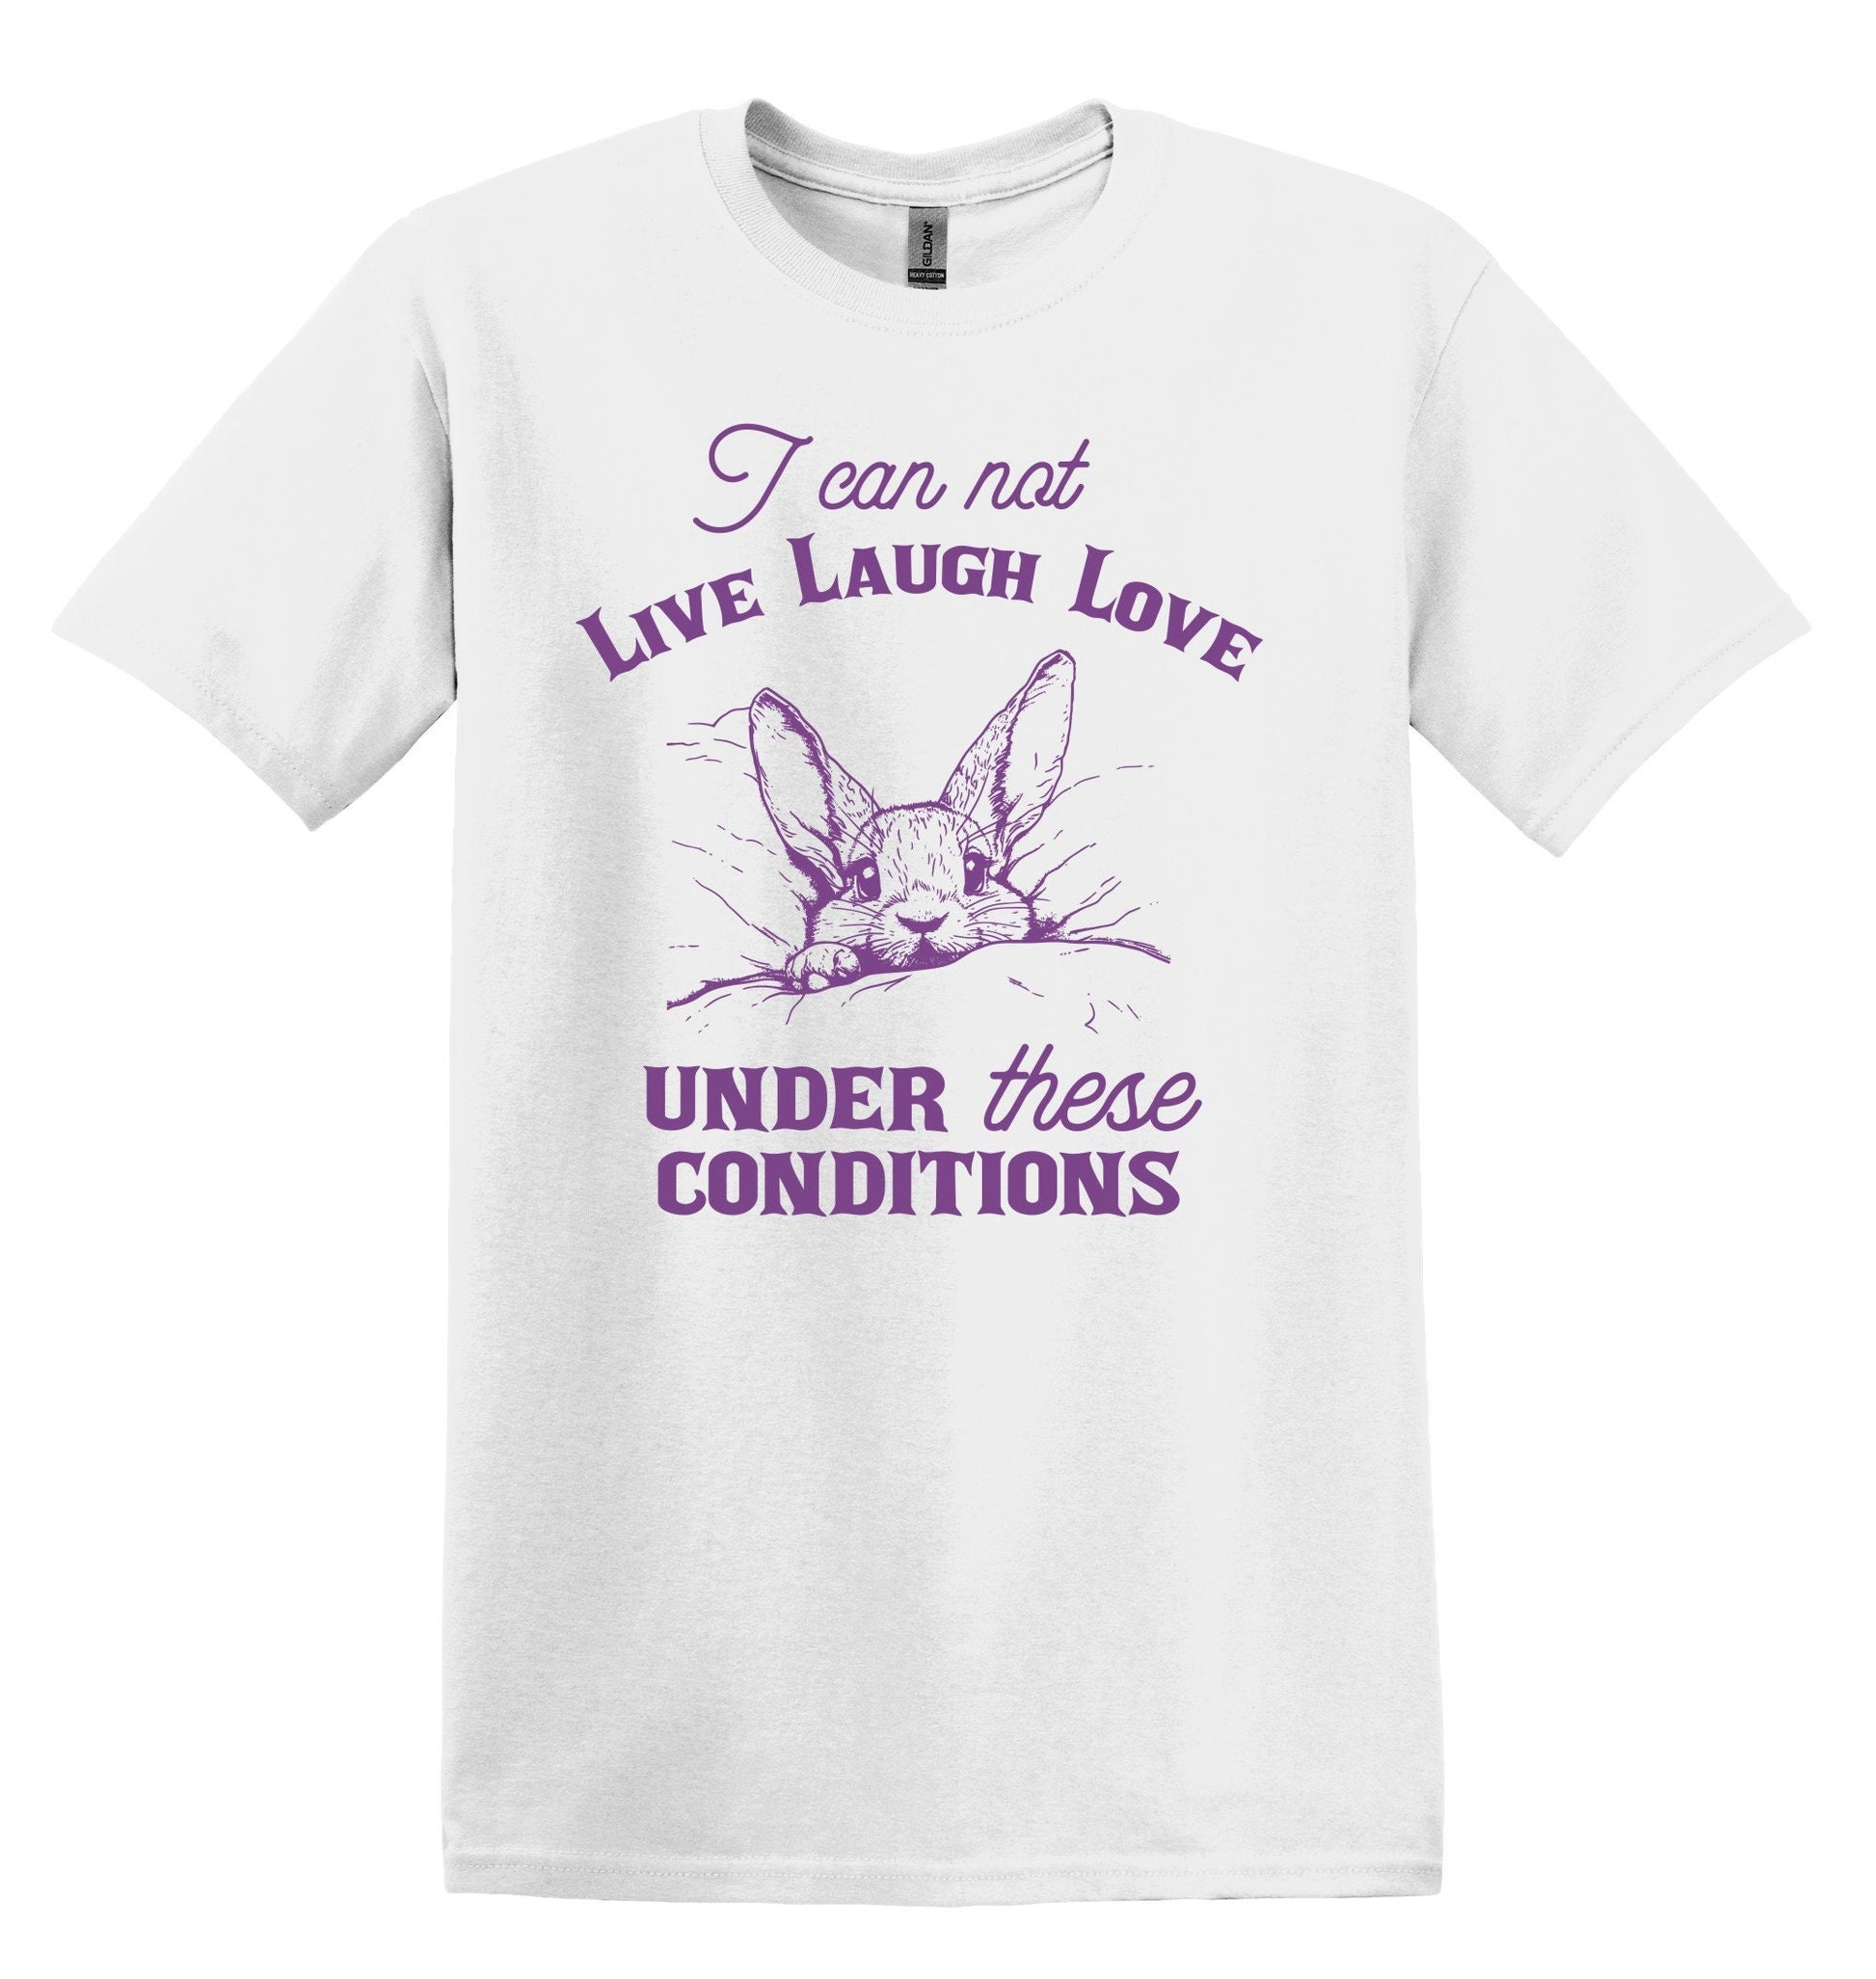 I Can Not Live Laugh Love Under These Conditions Shirt Graphic Shirt Funny Shirt Vintage Funny TShirt Nostalgia T-Shirt Relaxed Cotton Shirt